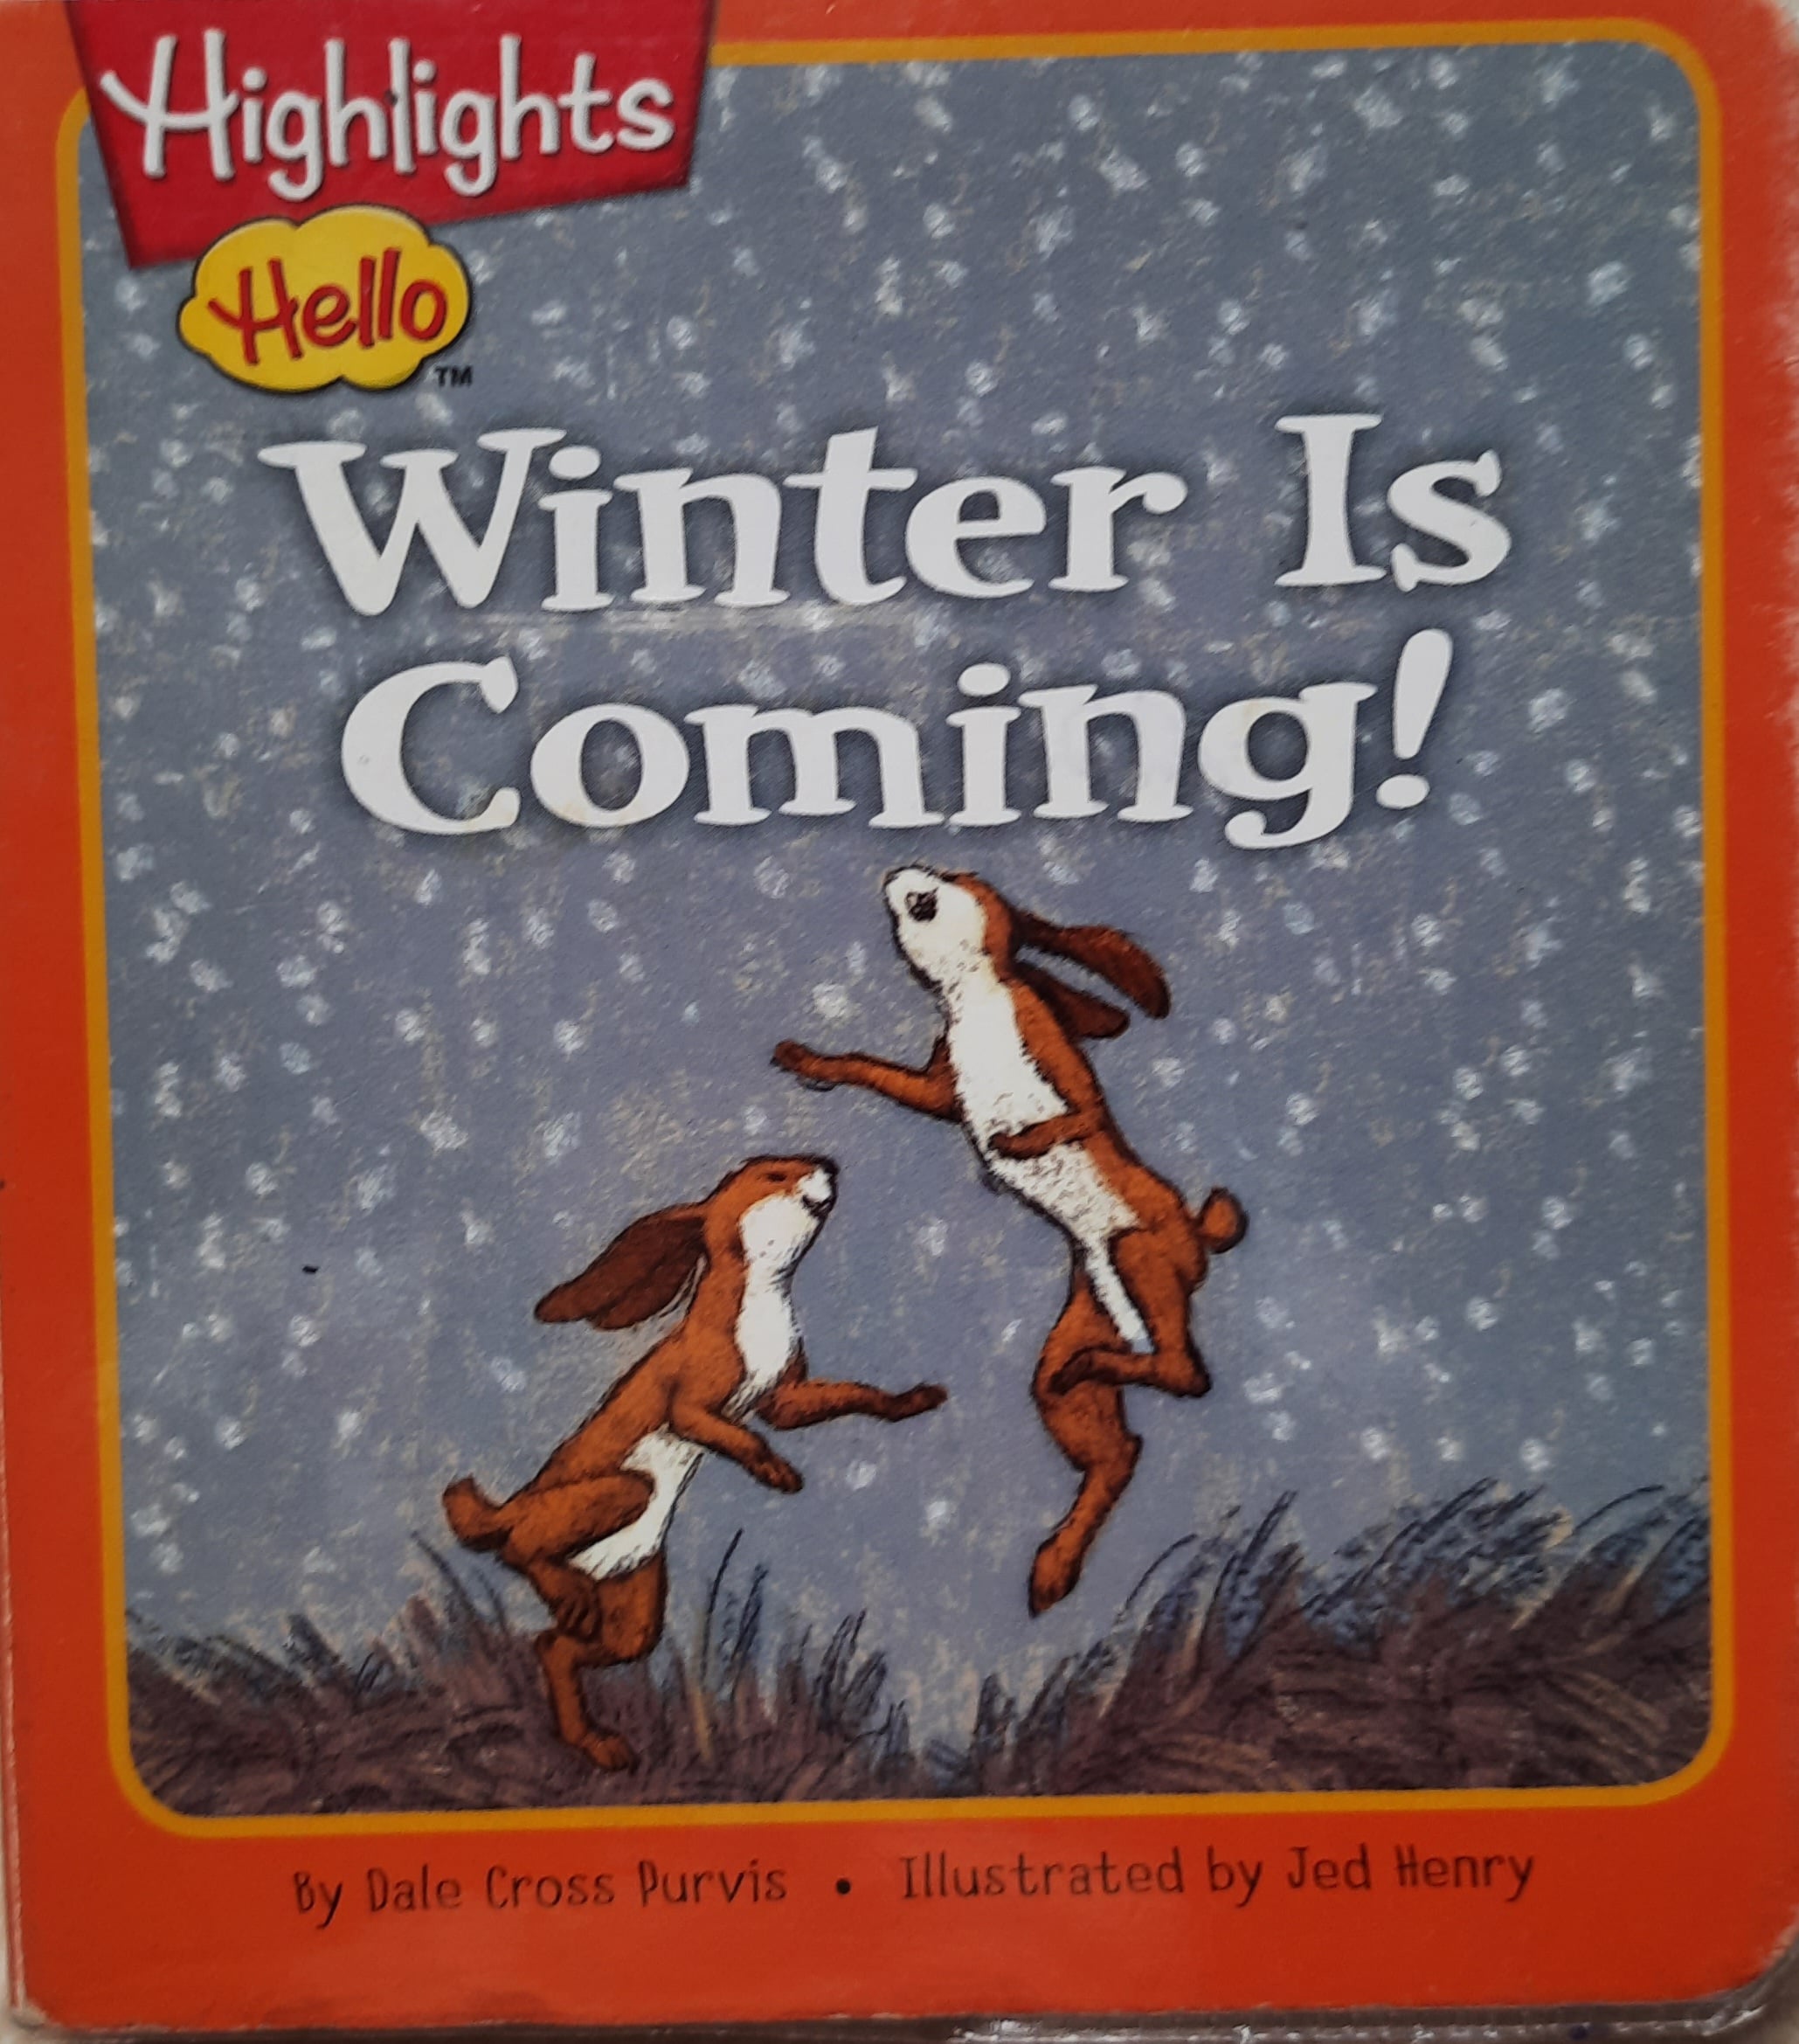 IMG : Winter is coming!